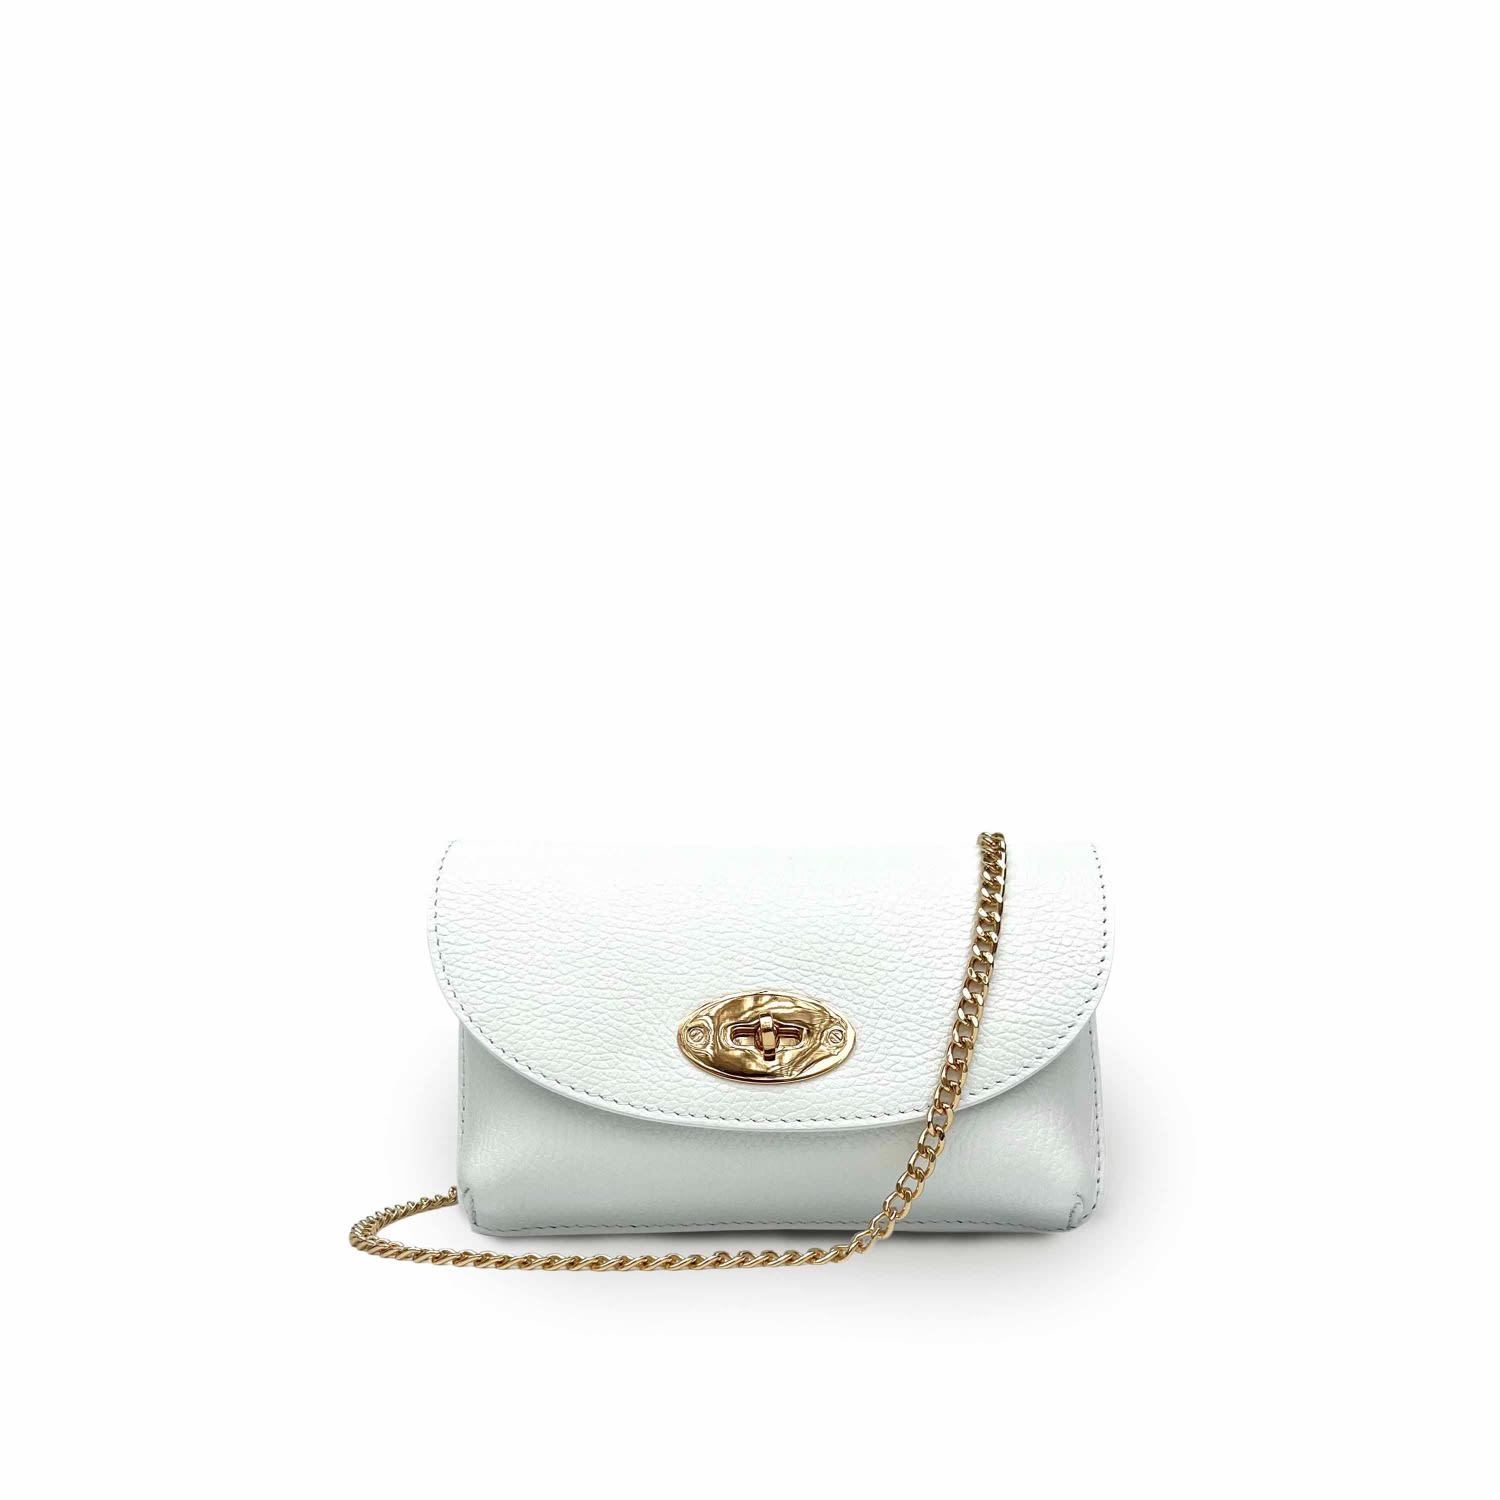 Apatchy London Women's The Mila White Leather Phone Bag